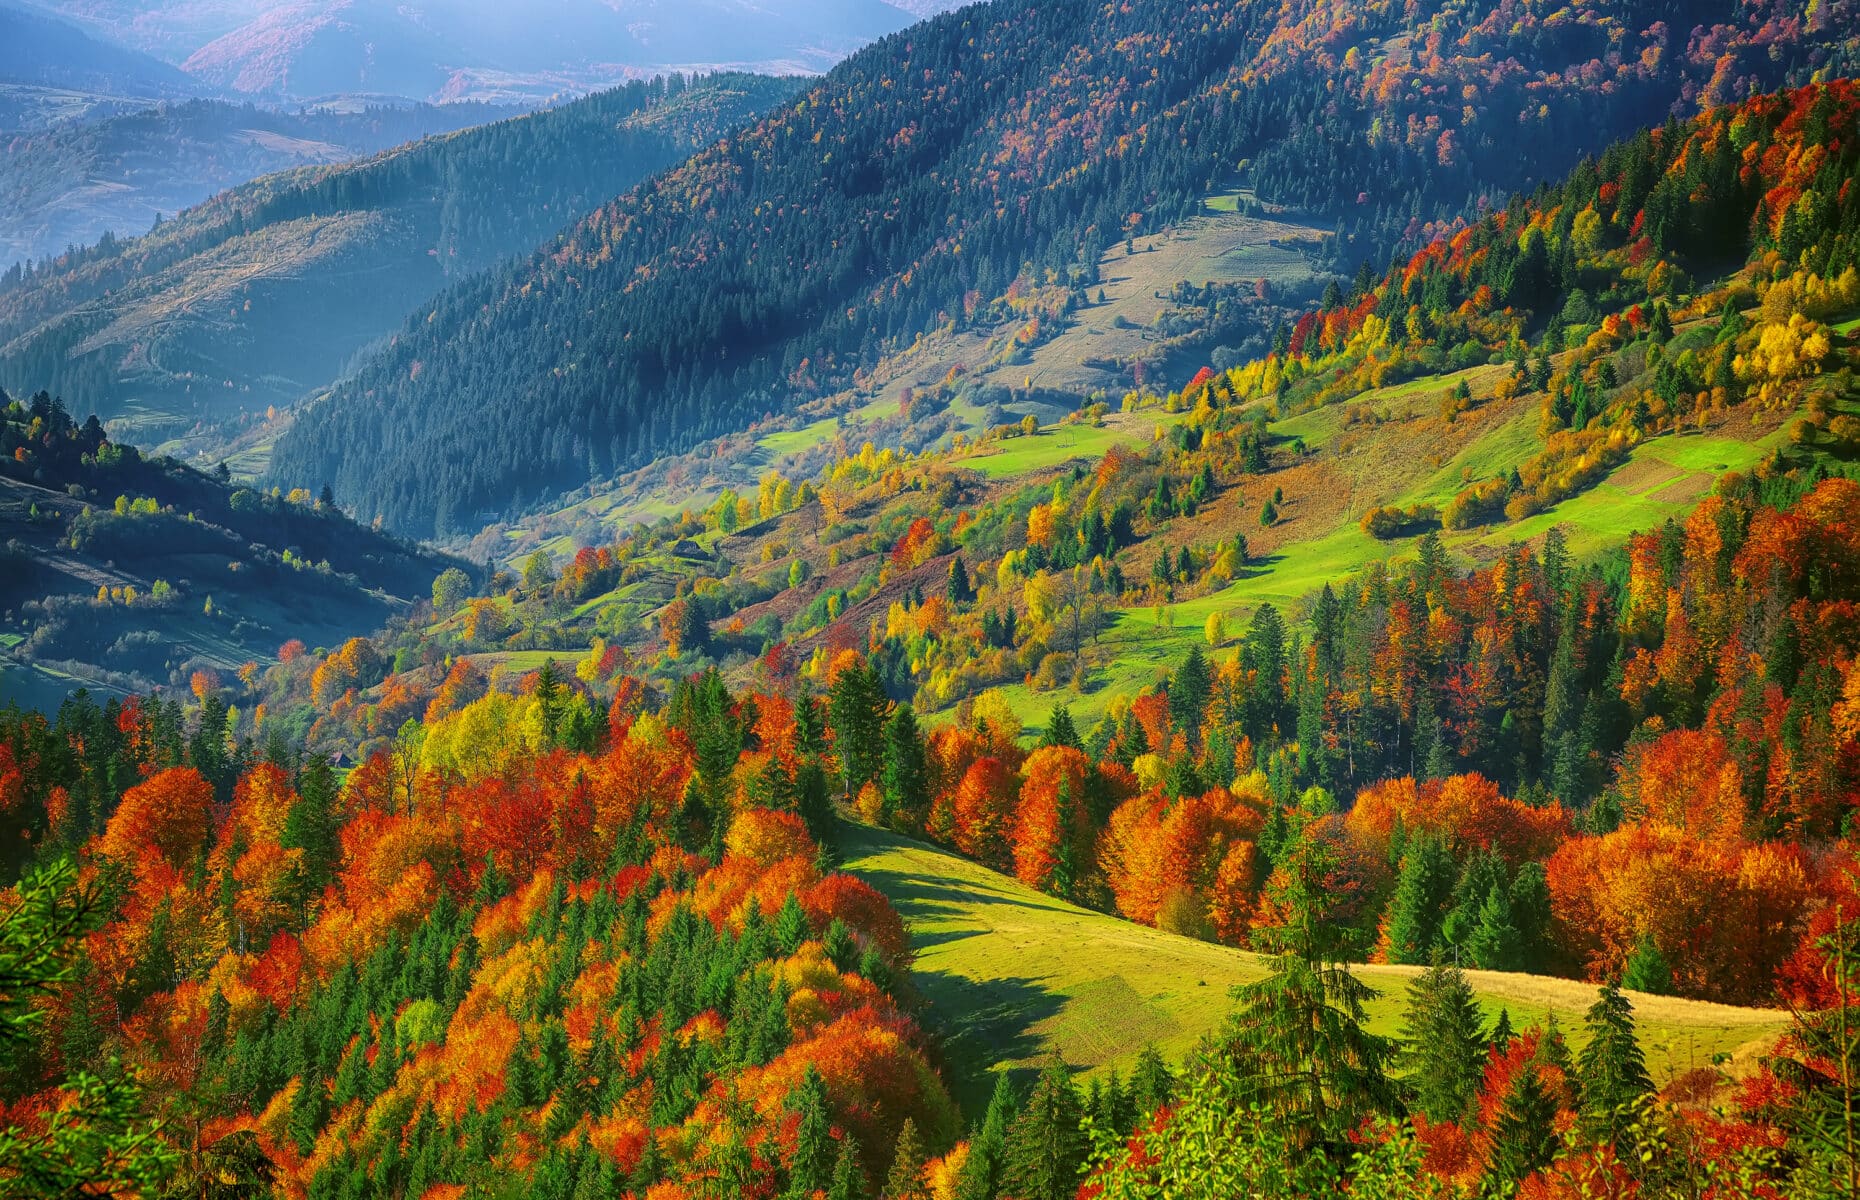 The mountain autumn landscape with colorful forest. Bright sunny weather